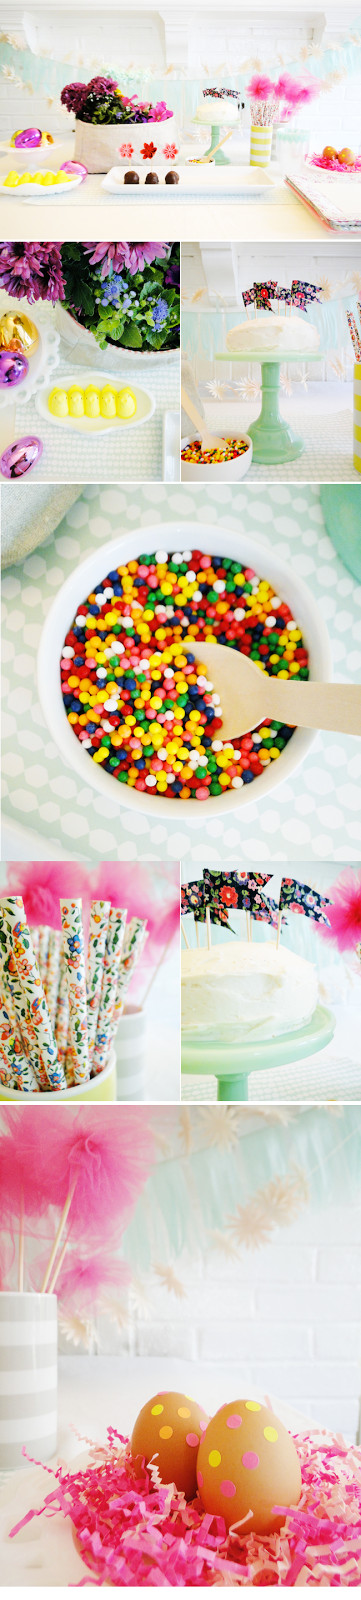 Easter Party Ideas On Pinterest
 The Pink Doormat Easter Party Ideas on Pinterest